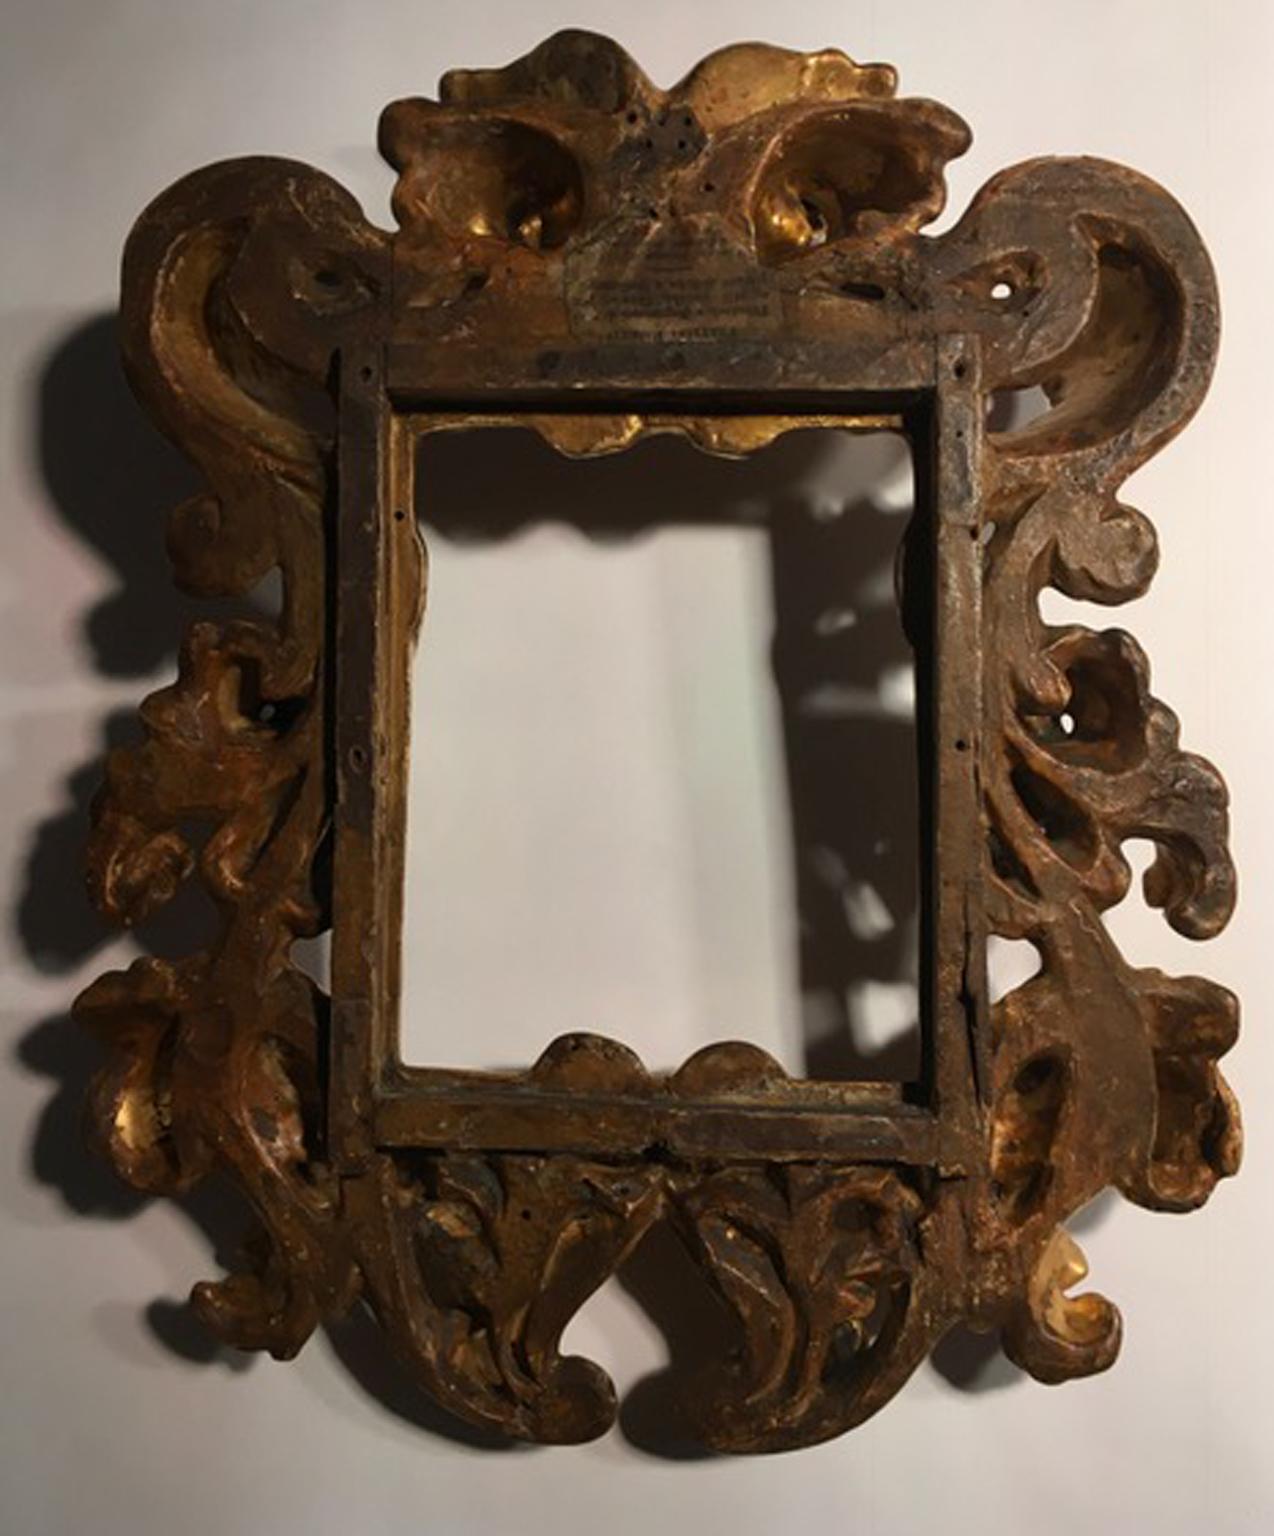 Italy 18th Century Golden Wood Frame in Tuscany Late Renaissance Style Florence 8